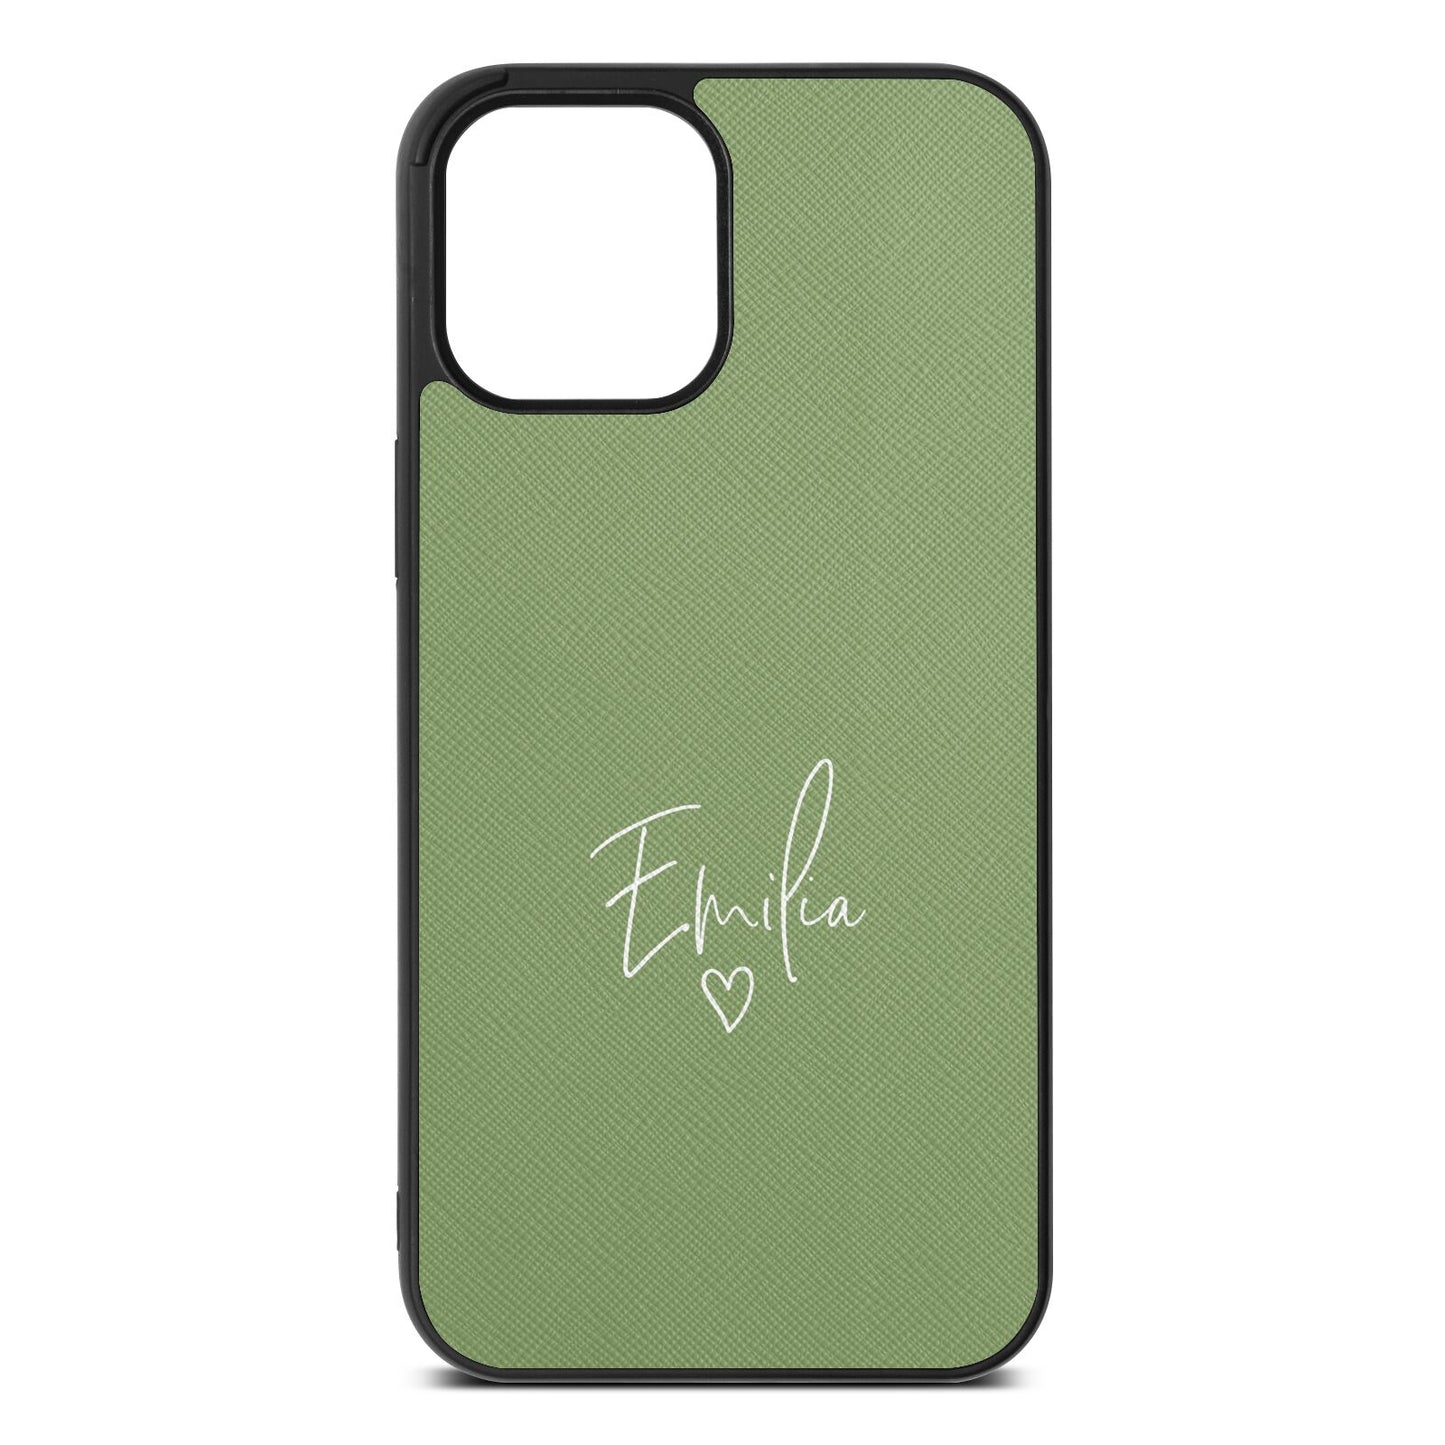 White Handwritten Name Transparent Lime Saffiano Leather iPhone 12 Pro Max Case